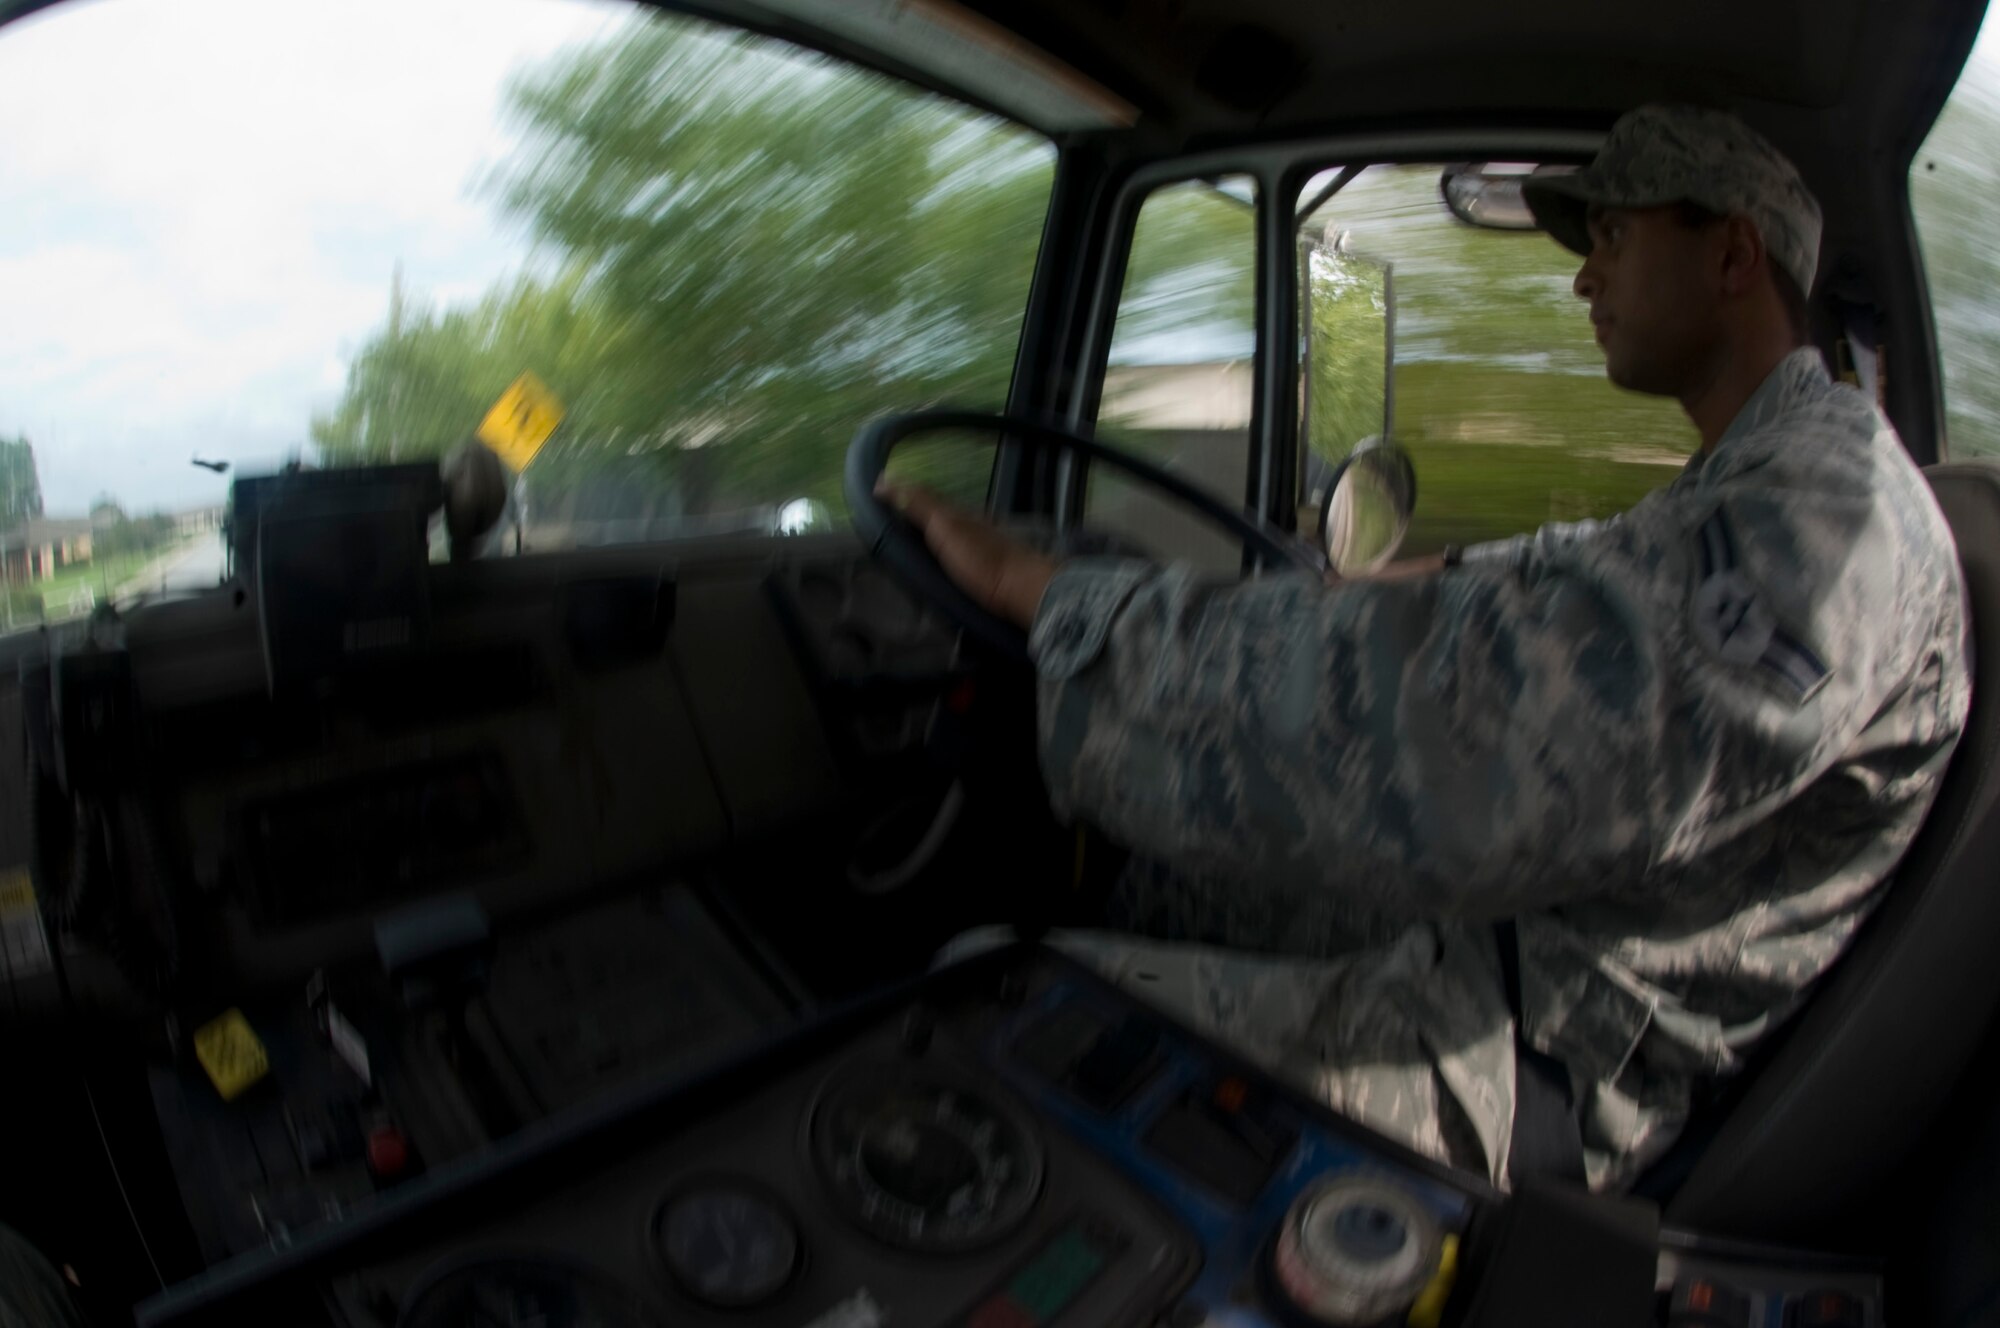 U.S. Air Force Airman 1st Class Salman Syed, a reservist pavement and construction heavy equipment operator from the 1st Special Operations Civil Engineering Squadron, drives a street sweeper on Independence Road, Hurlburt Field, Fla., Aug. 8, 2012. Street sweeping is an effective method of removing large debris that can block storm water facilities, causing localized flooding during heavy rains. (U.S. Air Force Photo/Airman 1st Class Hayden K. Hyatt)